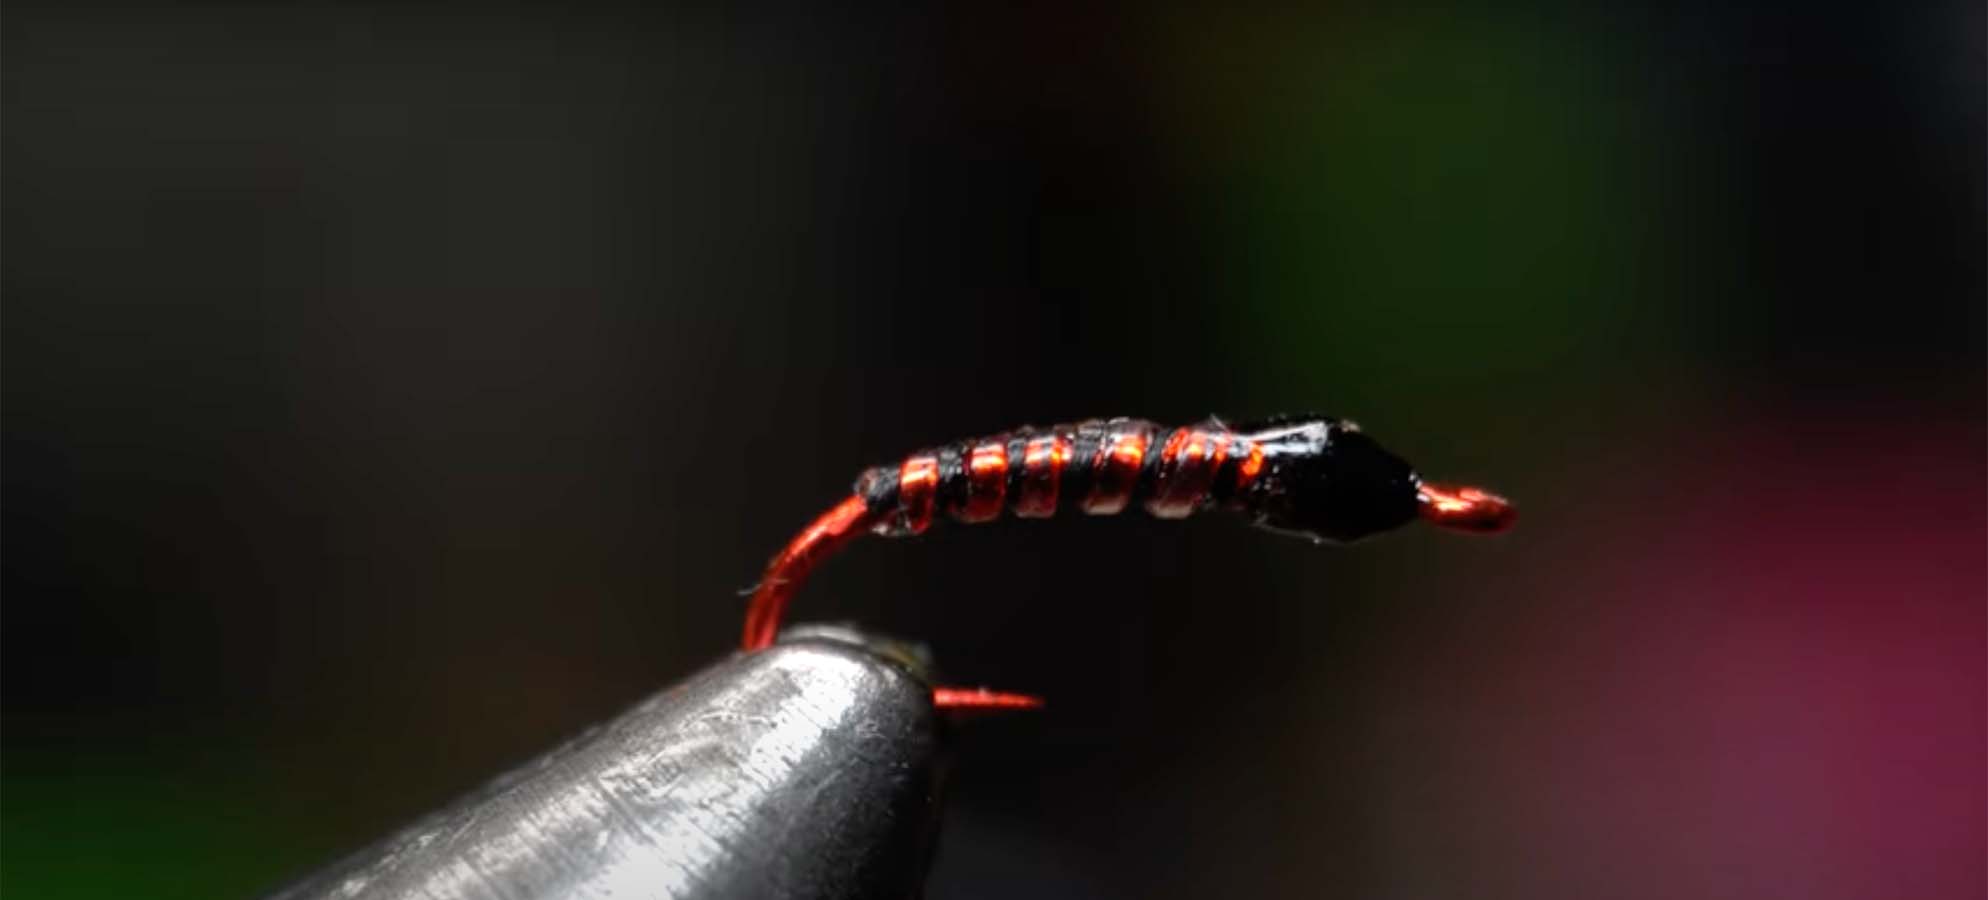 How to Tie McFly's Hook Worm